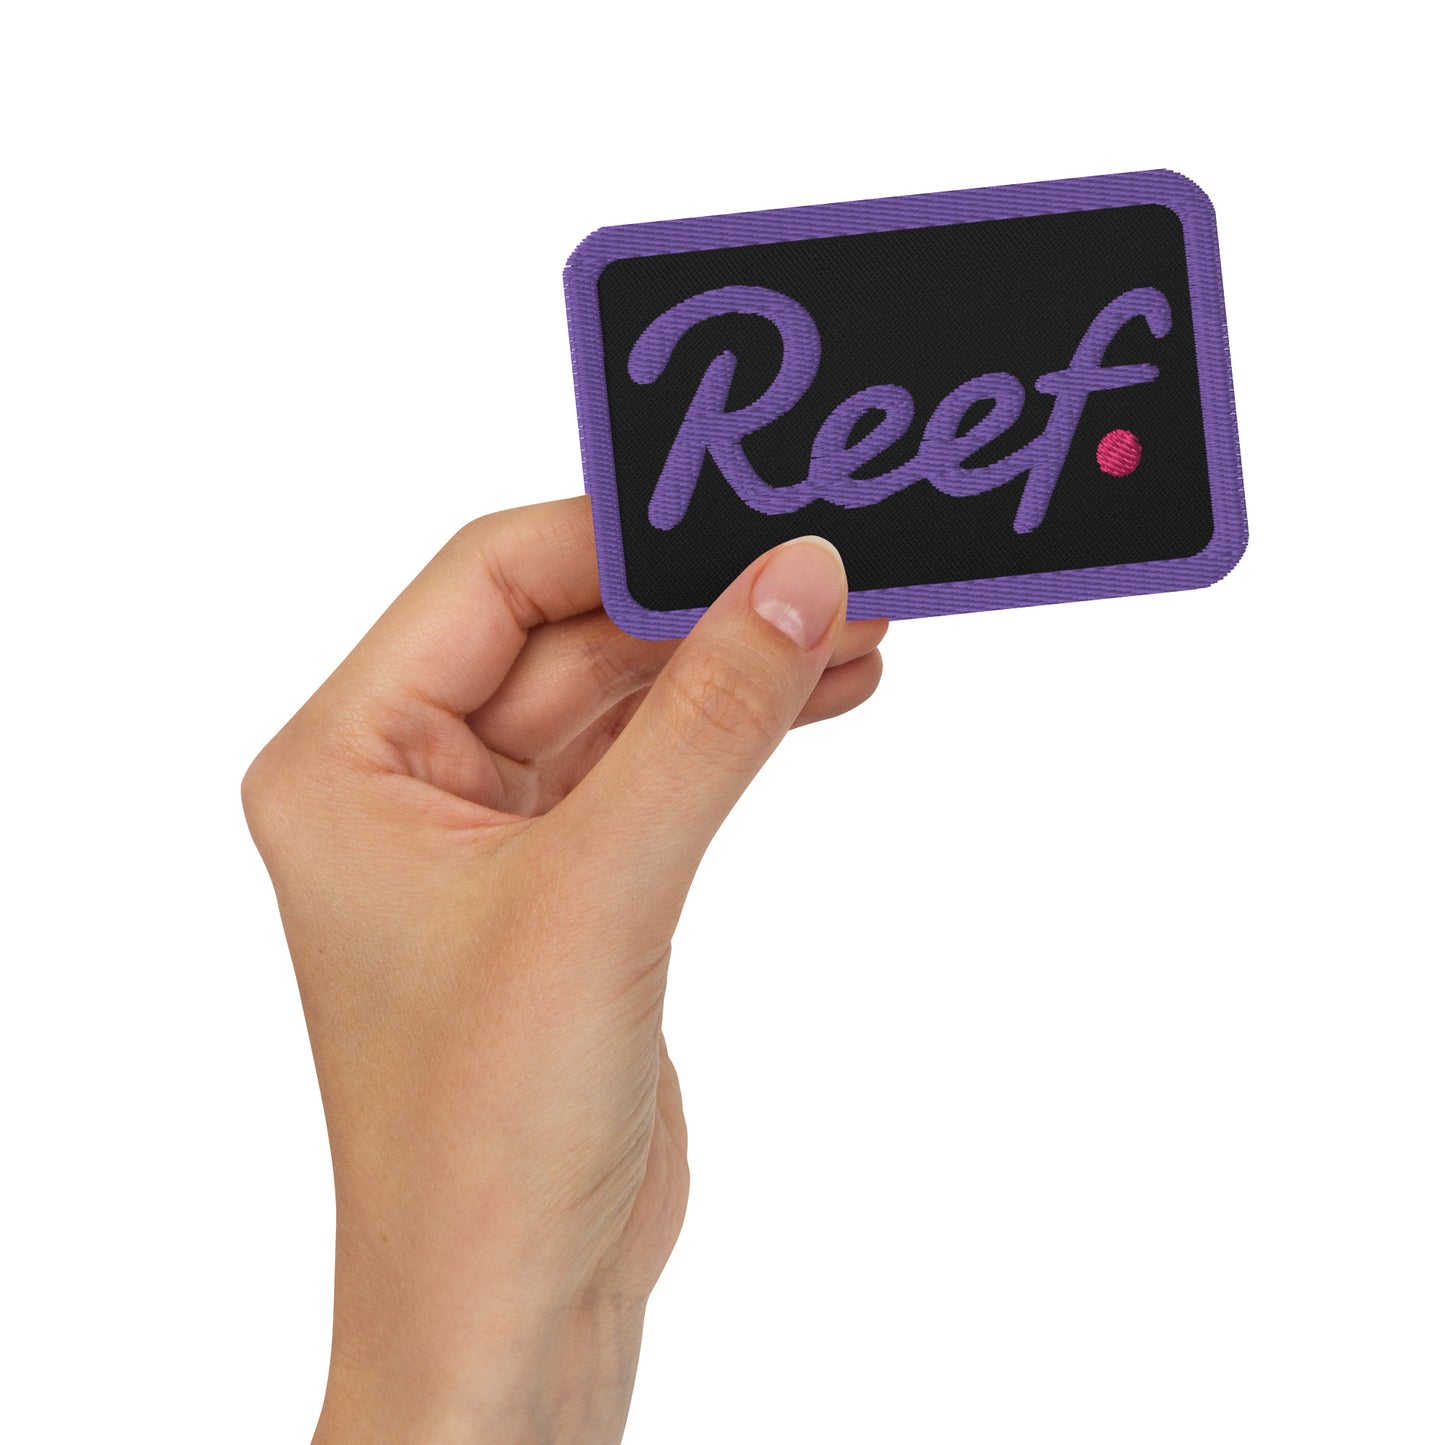 Reef embroidered patches (purple)